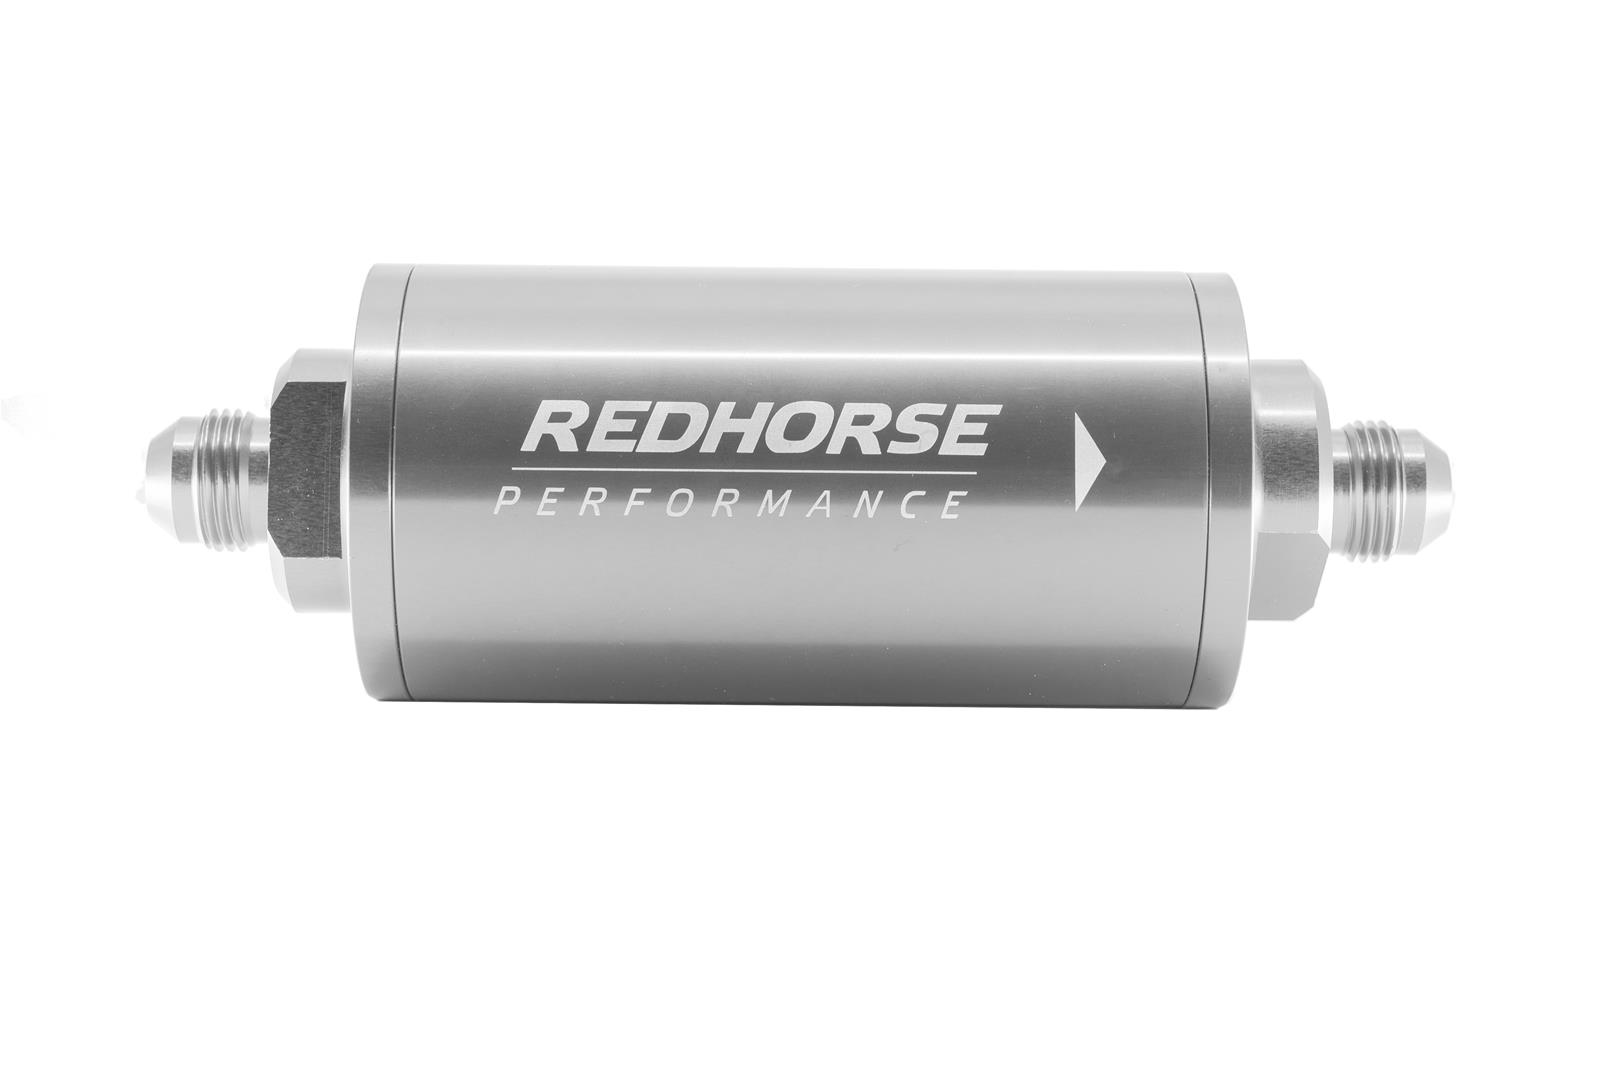 Redhorse Performance 4651-12-5-12 6in Cylindrical In-Line Race Fuel Filter w/ 12 Micron Fiberglass element - 12 AN